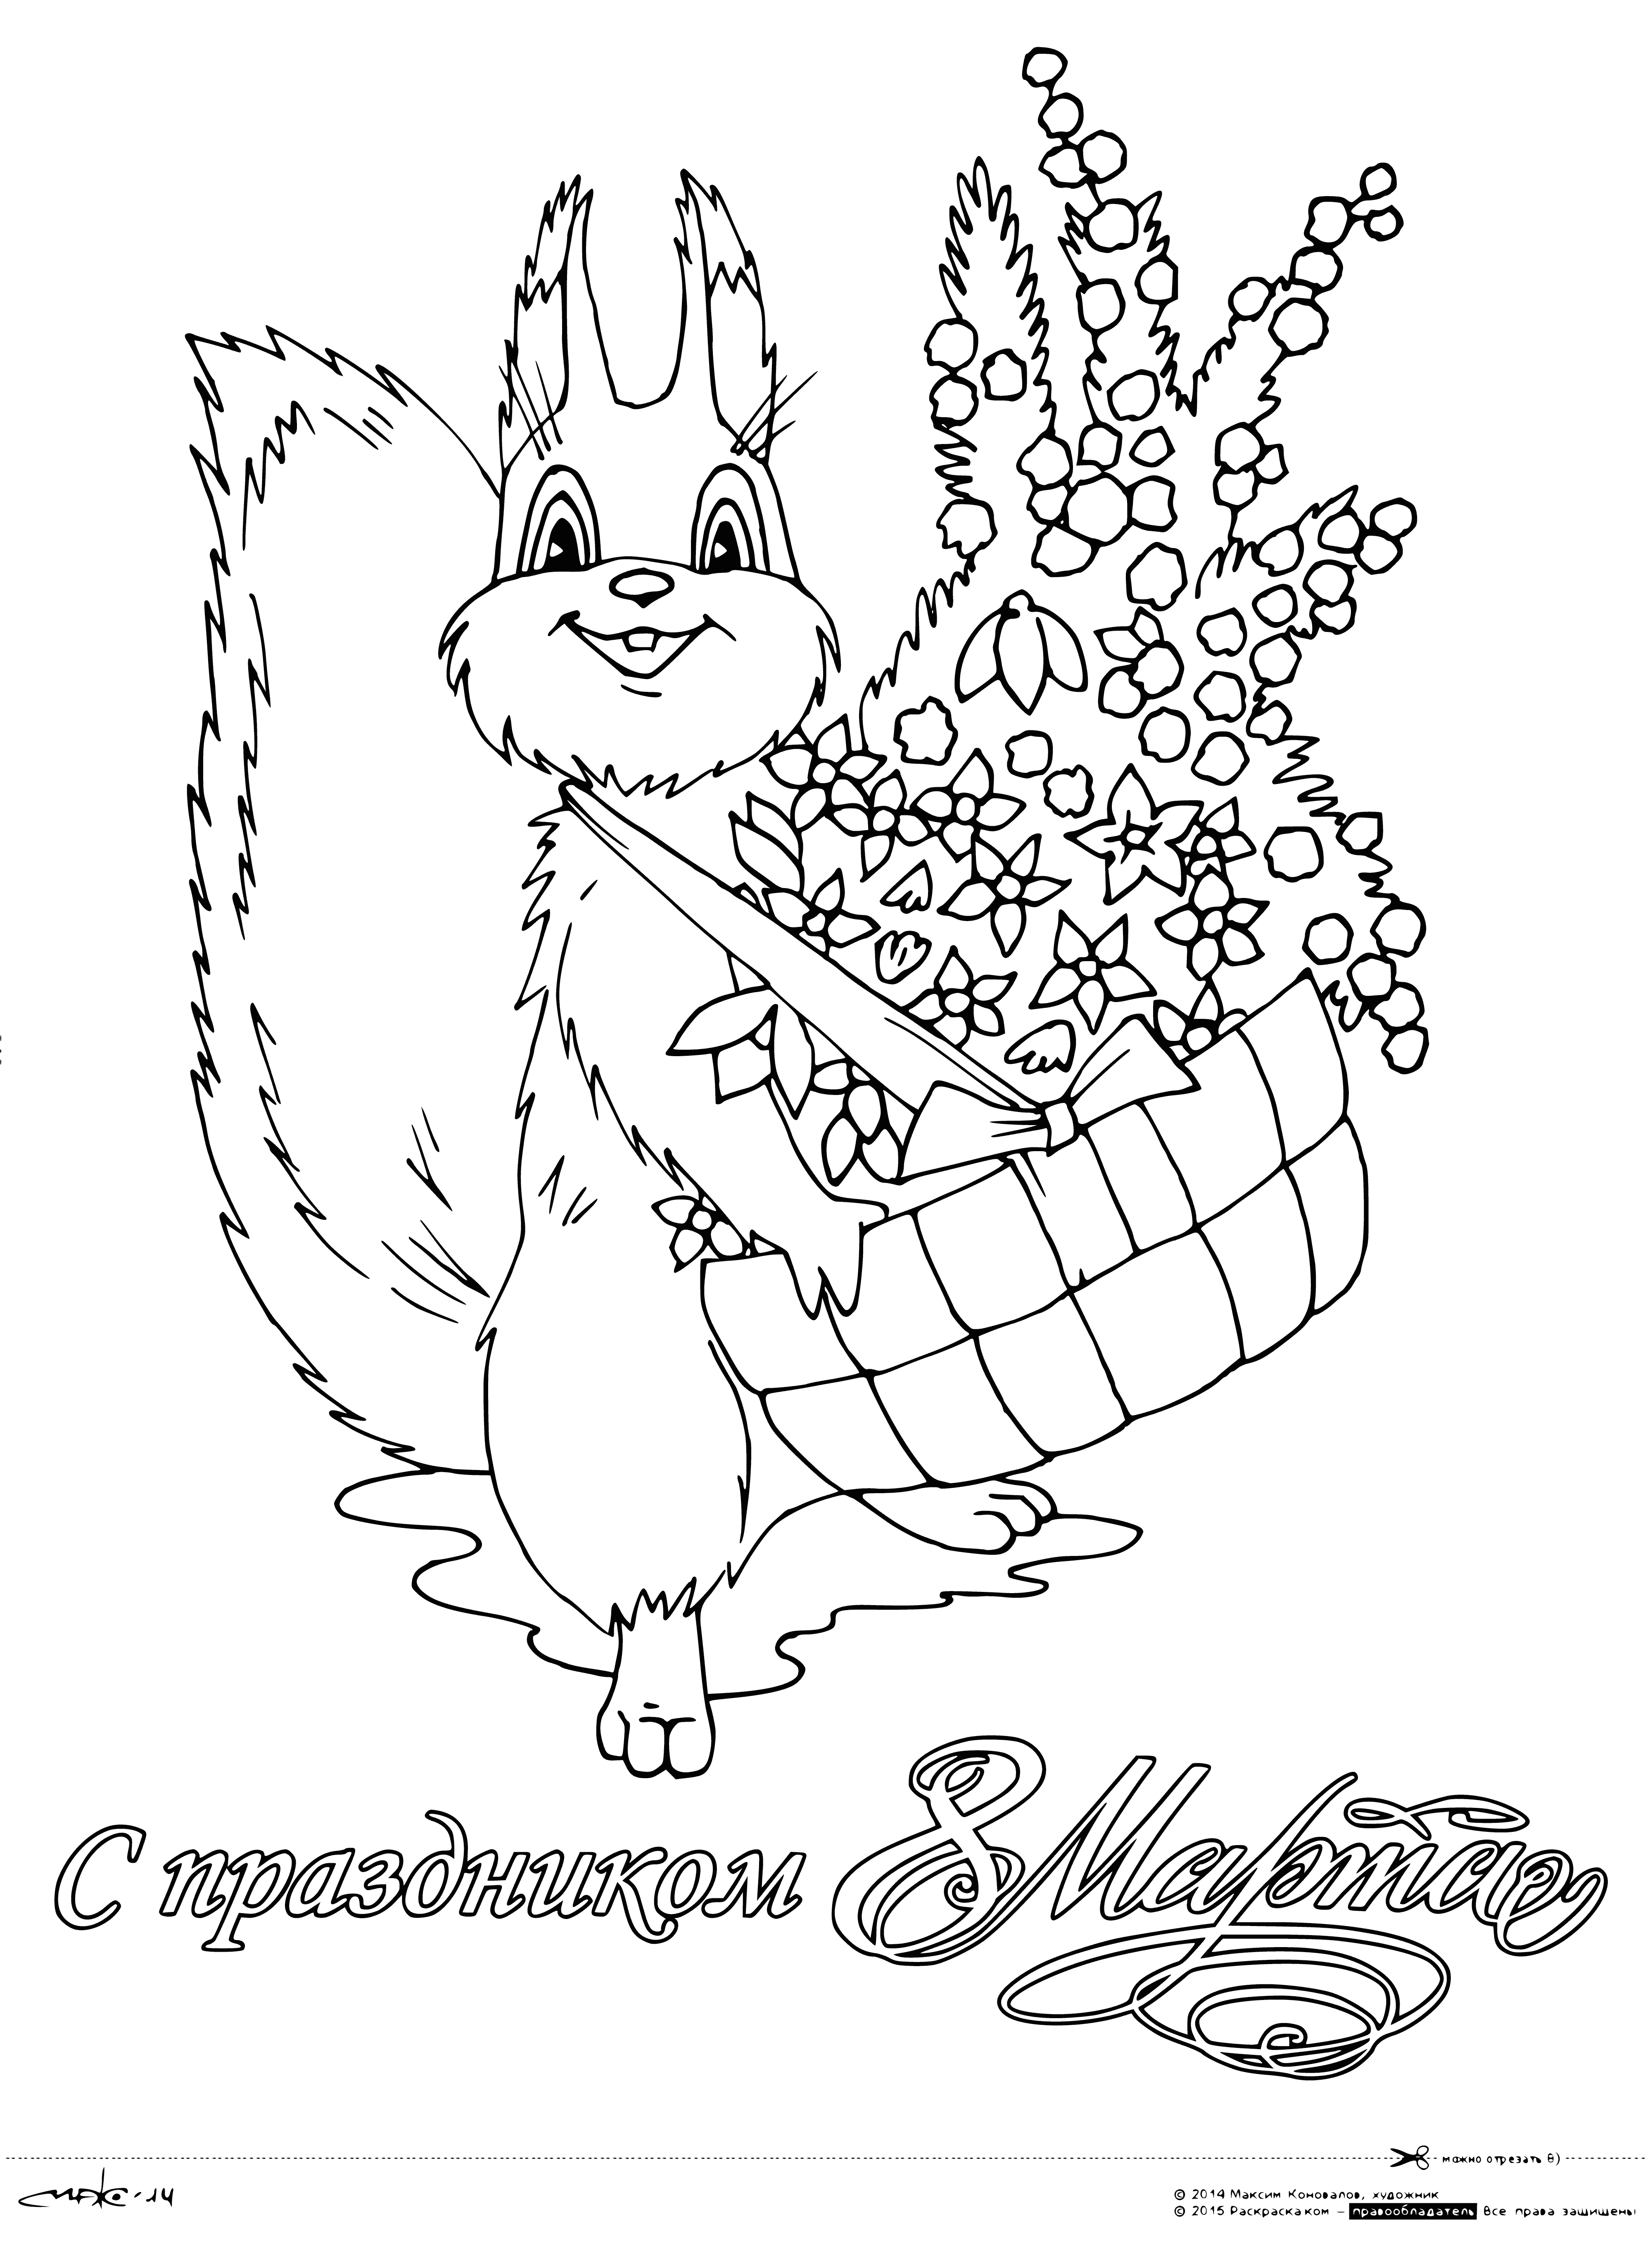 coloring page: Coloring page of red & white flower w/ white center, green stem & light blue background.